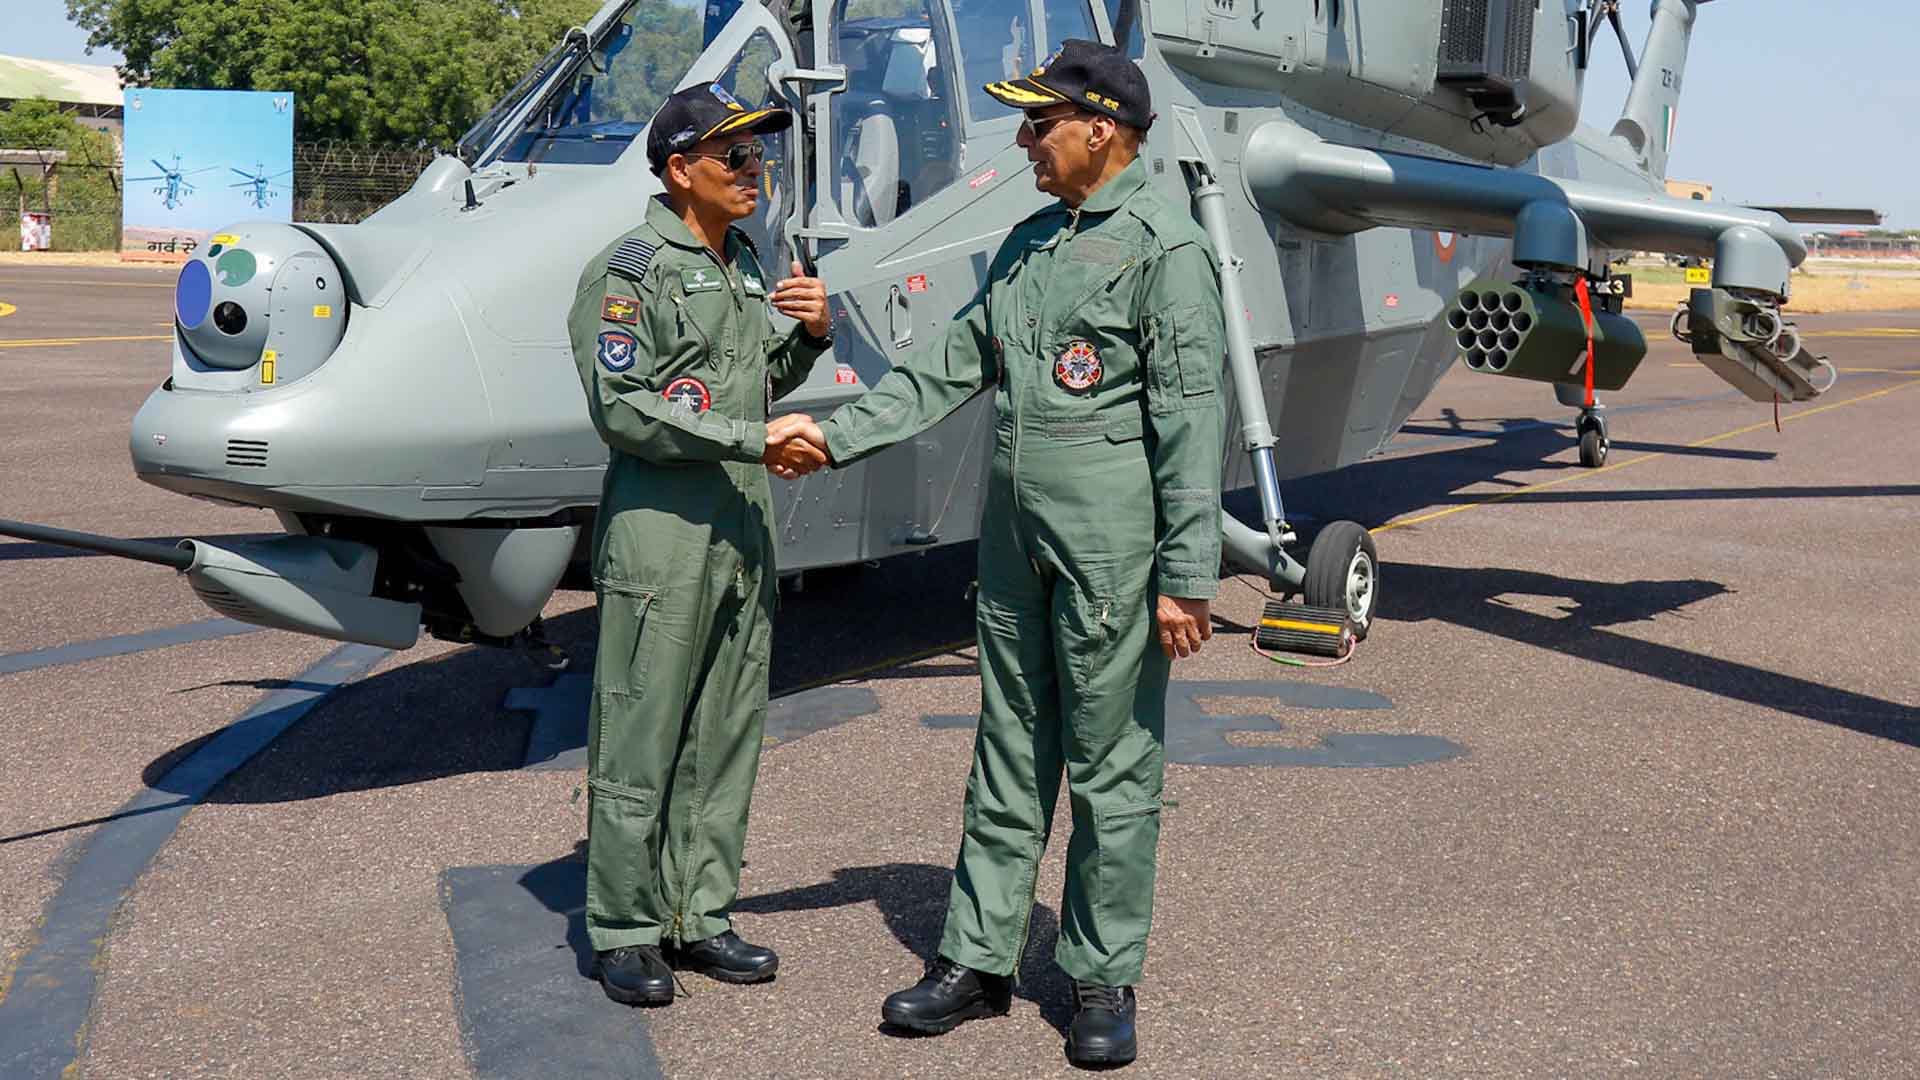 New Indian Air Force light combat helicopter is formally inducted into service